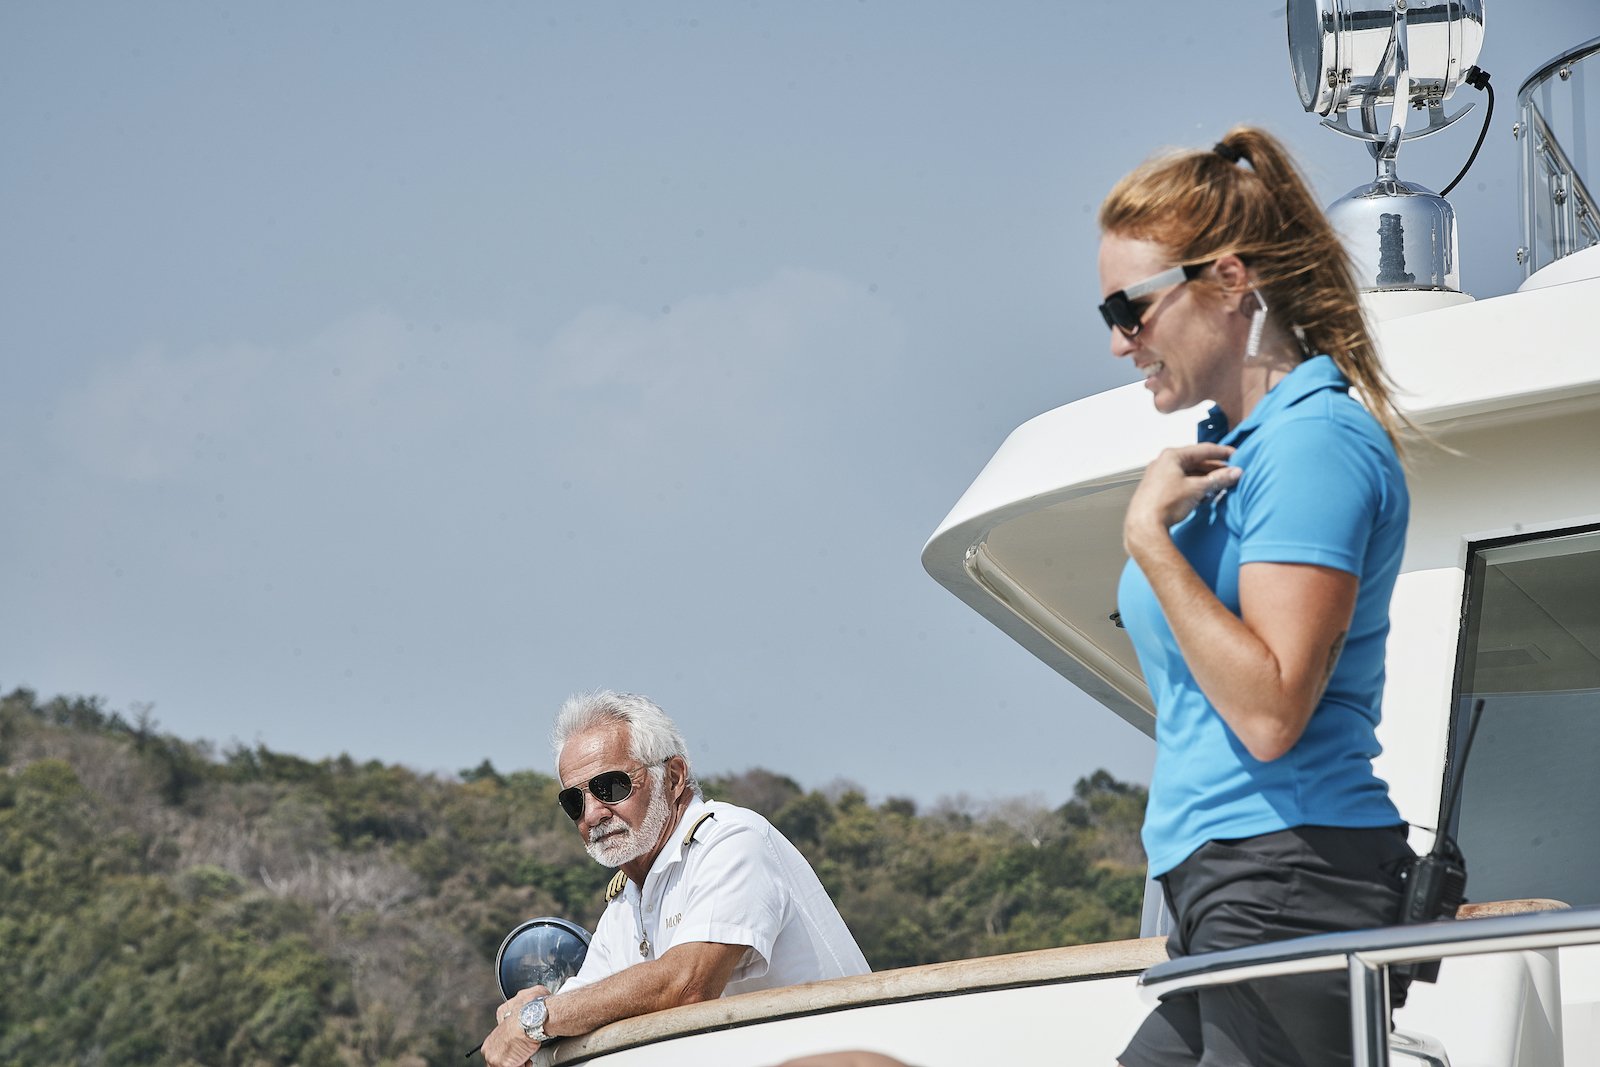 Rhylee Gerber from Below Deck Season 7 wasn't thrilled when the footage wasn't shown of Captain Lee Rosbach denying her a tip